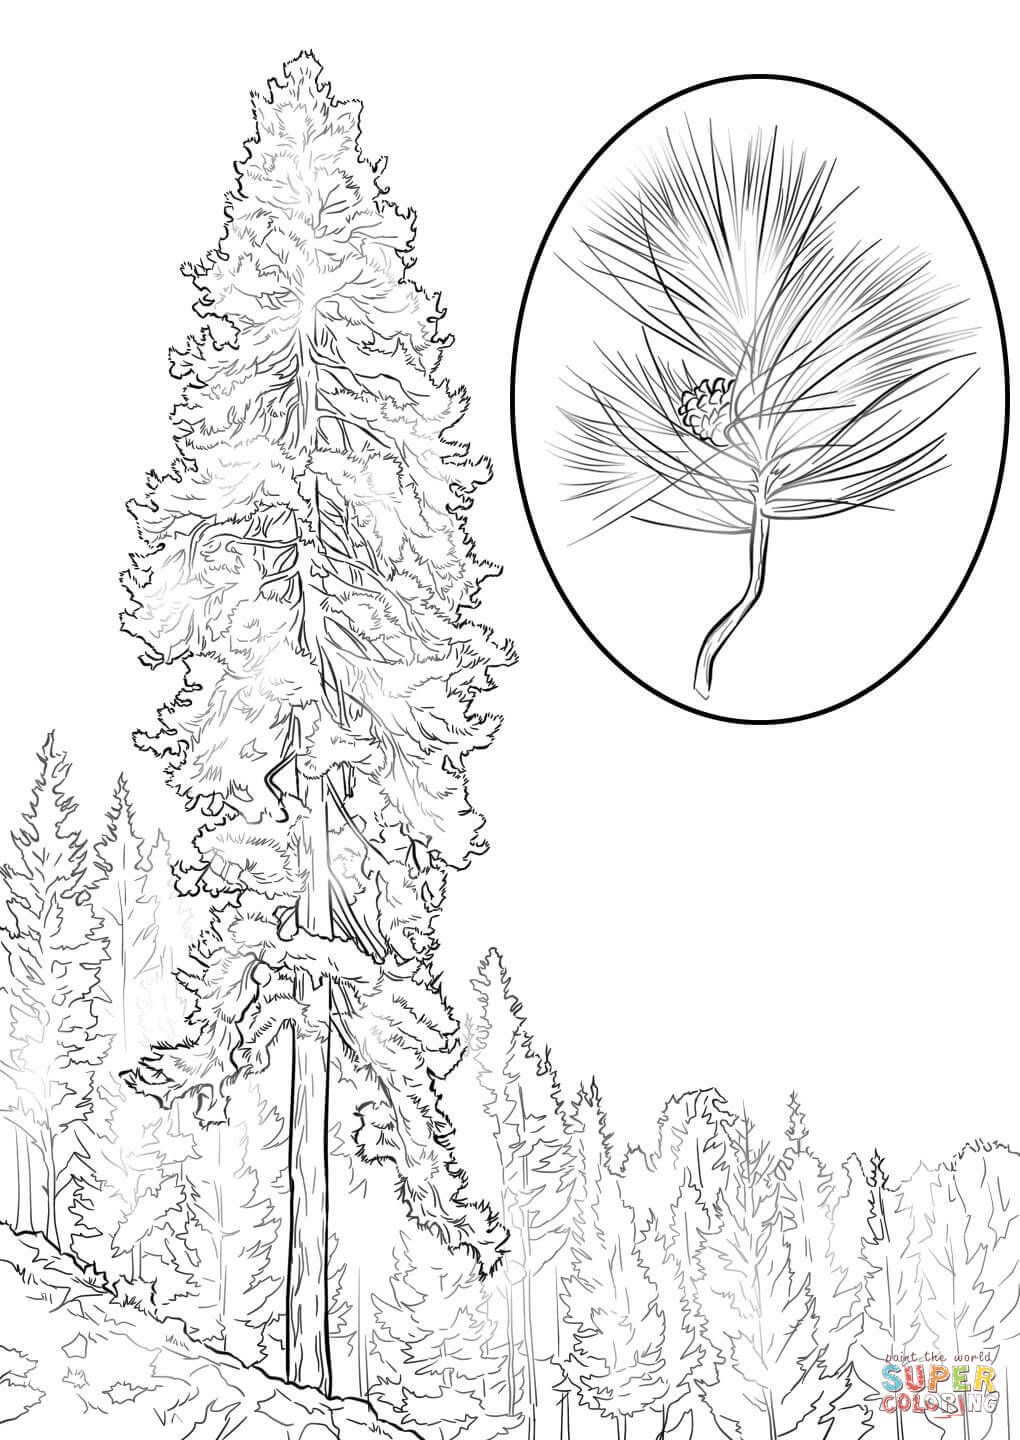 Ponderosa pine coloring page from pine trees category select from printable crafts of cartoons â tree coloring page flower coloring pages coloring pages